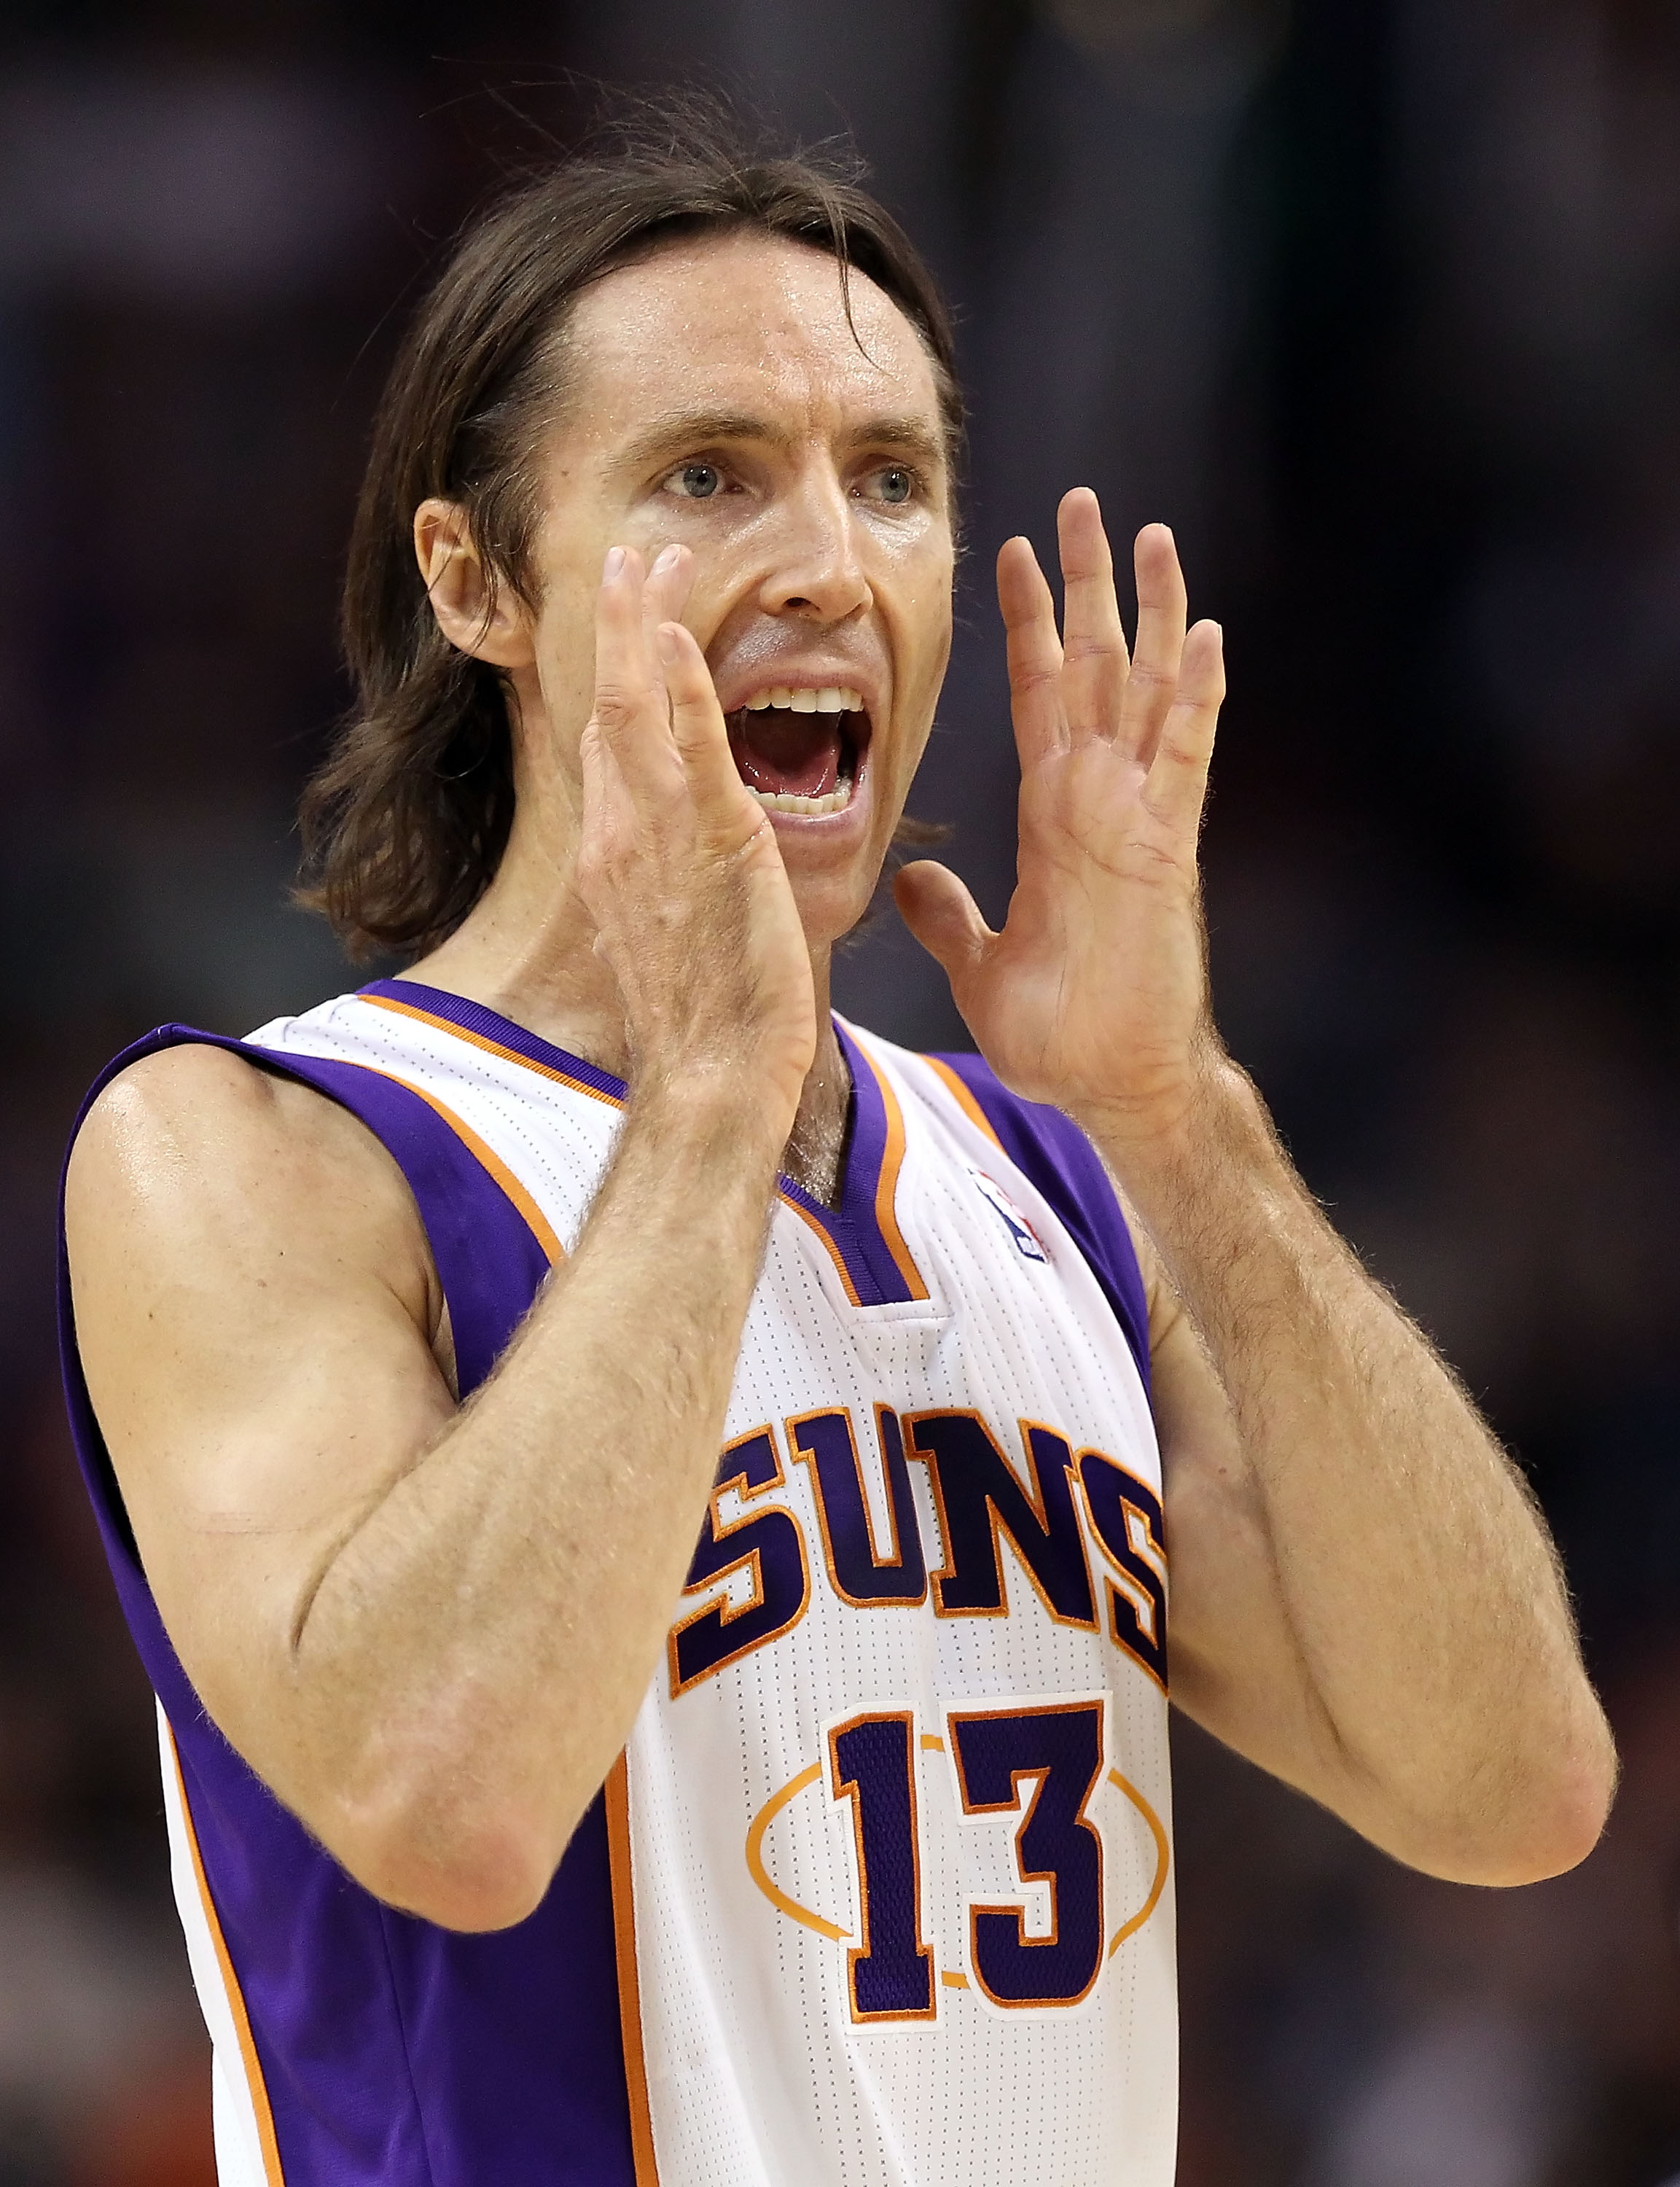 PHOENIX, AZ - APRIL 13:  Steve Nash #13 of the Phoenix Suns during the NBA game against the San Antonio Spurs at US Airways Center on April 13, 2011 in Phoenix, Arizona.  NOTE TO USER: User expressly acknowledges and agrees that, by downloading and or usi